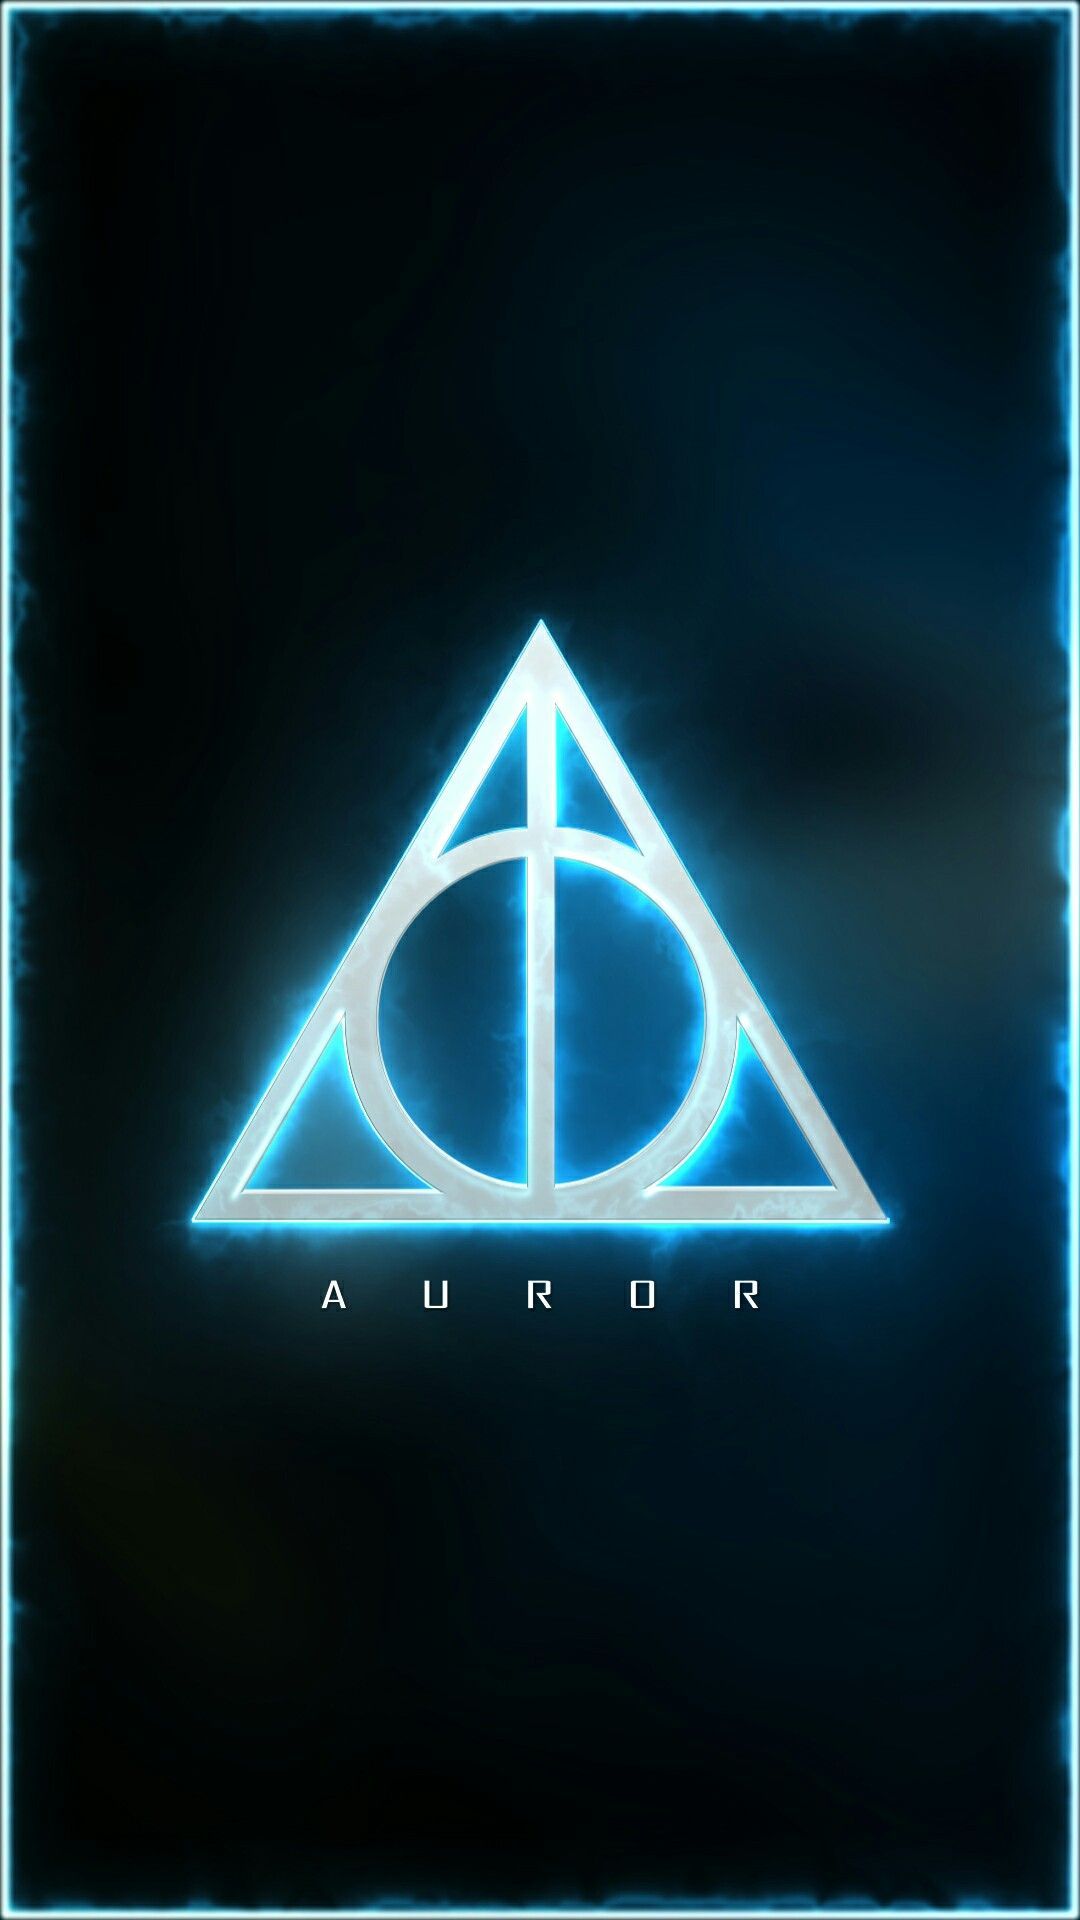 Deathly Hallow Mobile HD wallpaper. Deathly hallows wallpaper, Harry potter sign, Deathly hallows symbol